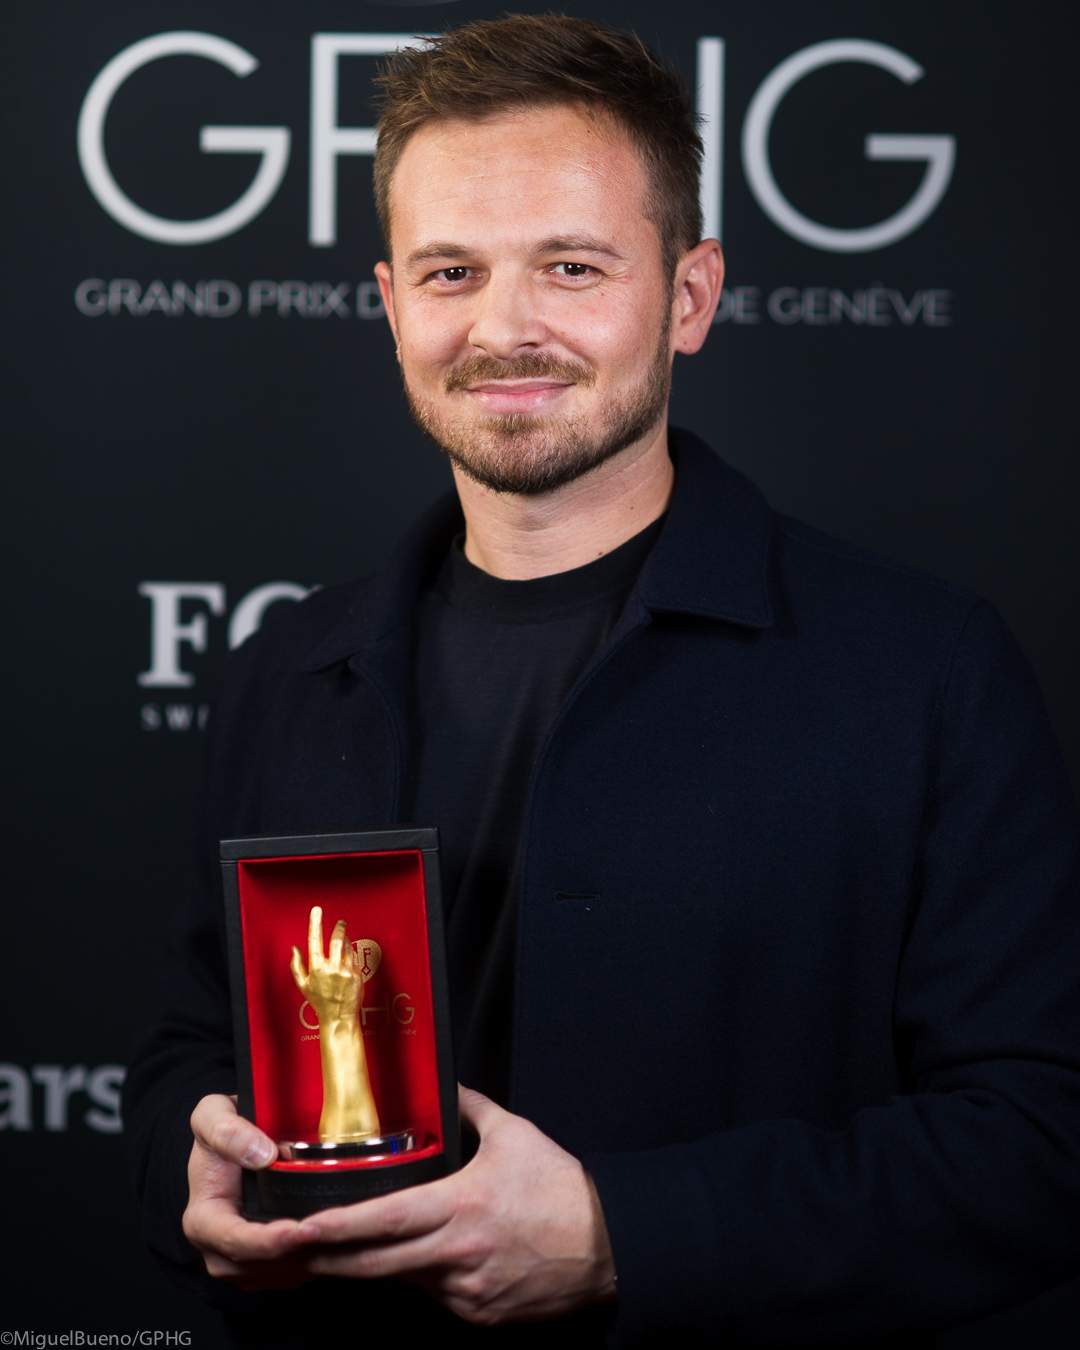 Rexhep Rexhepi, Watchmaker and founder of Akrivia, winner of the Men’s Watch Prize 2022